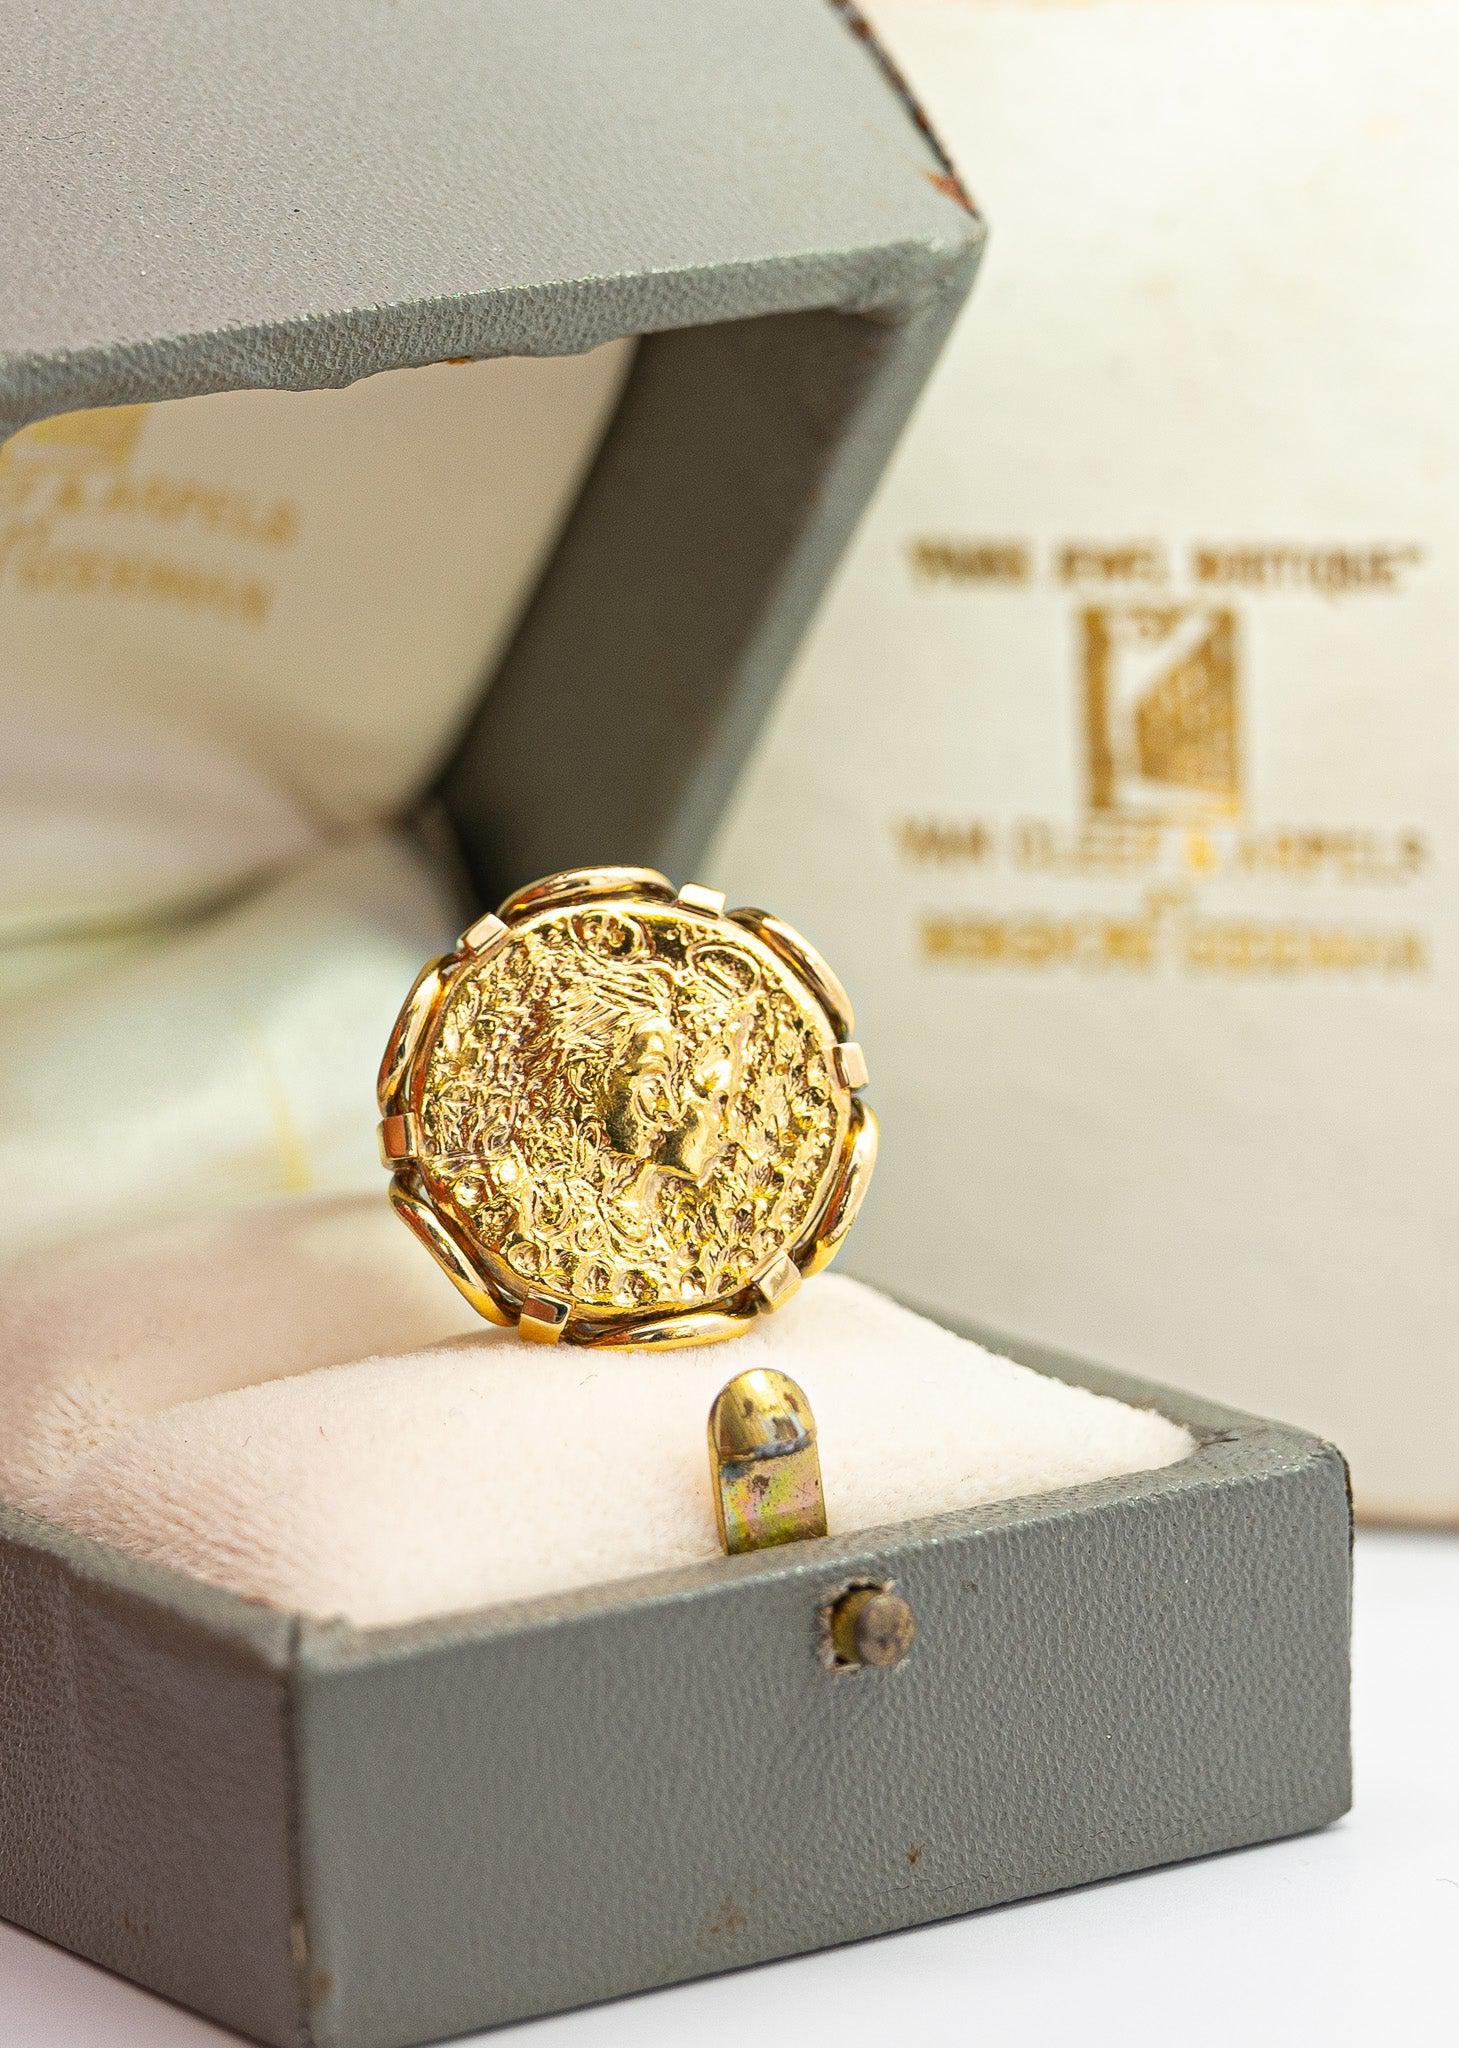 Salvador Dali For Piaget 'Dalí d'Or' 22K Gold Coin Ring in 18K Gold Setting | Retailed by Van Cleef & Arpels at Bergdorf Goodman Paris Jewels Boutique